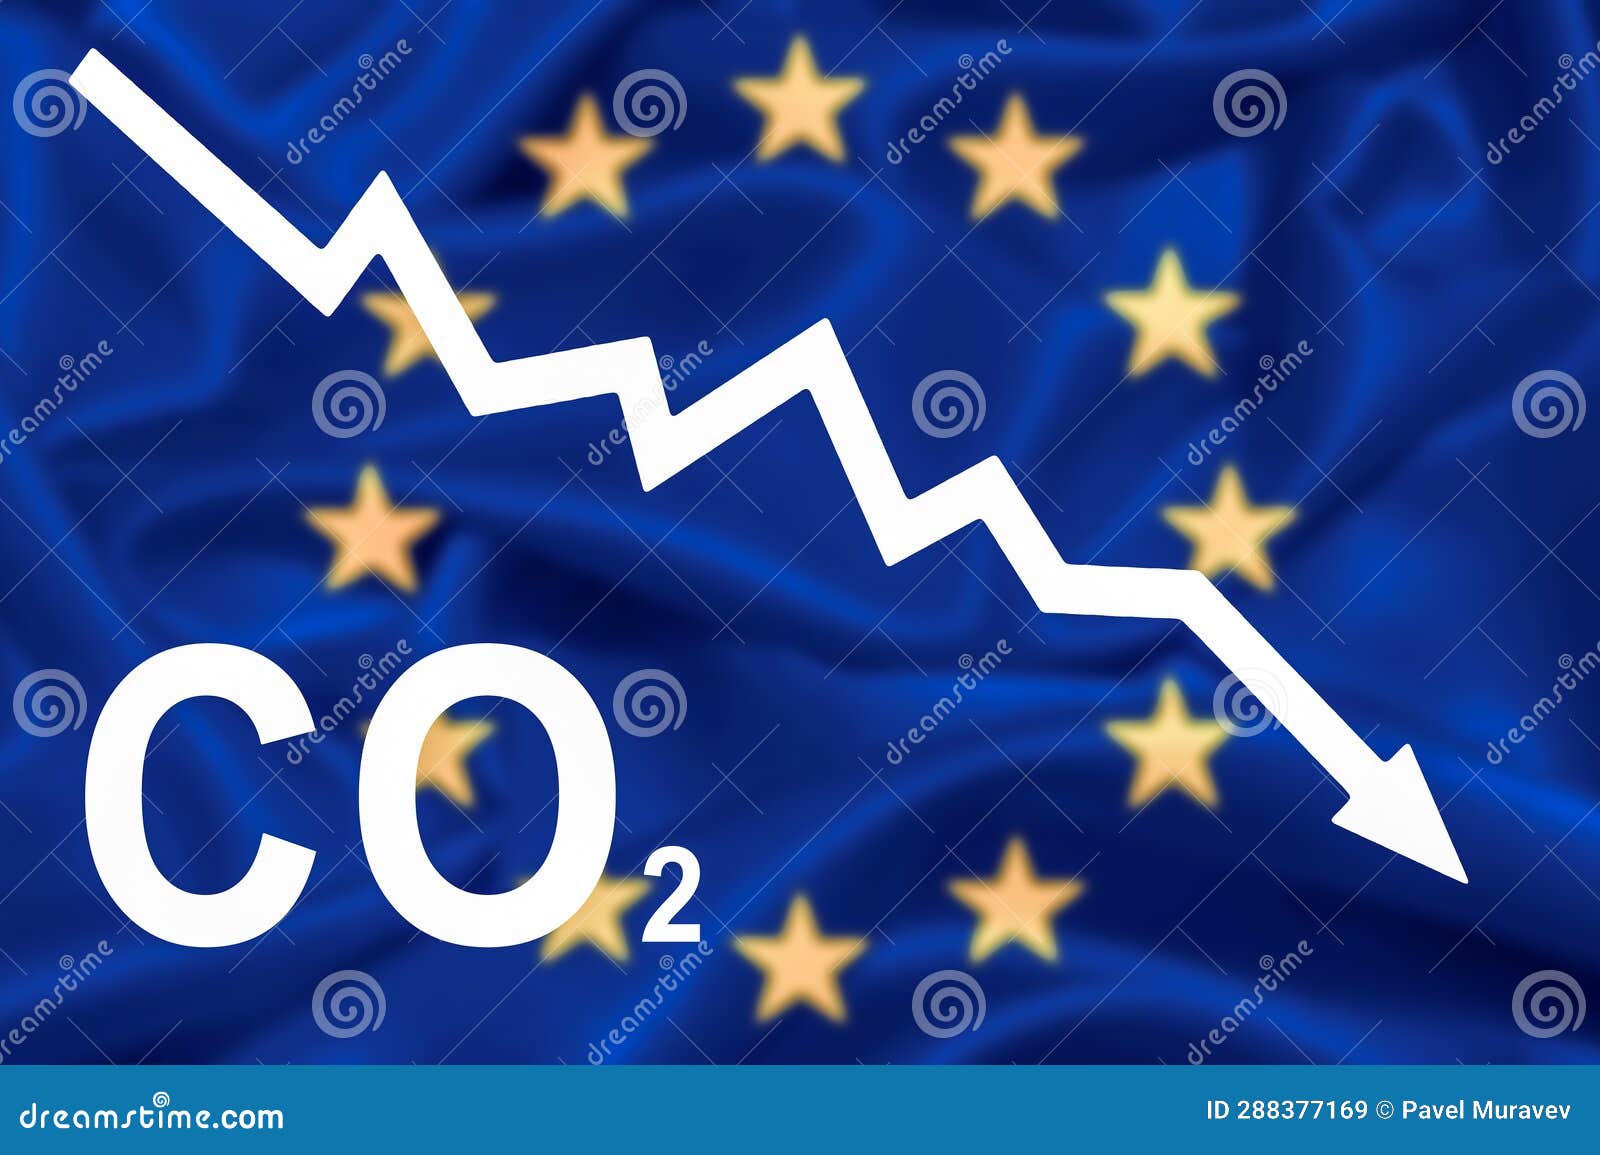 reducing co2 emissions in european union. lower co2 emissions to limit global warming and climate change. new law to decarbonize